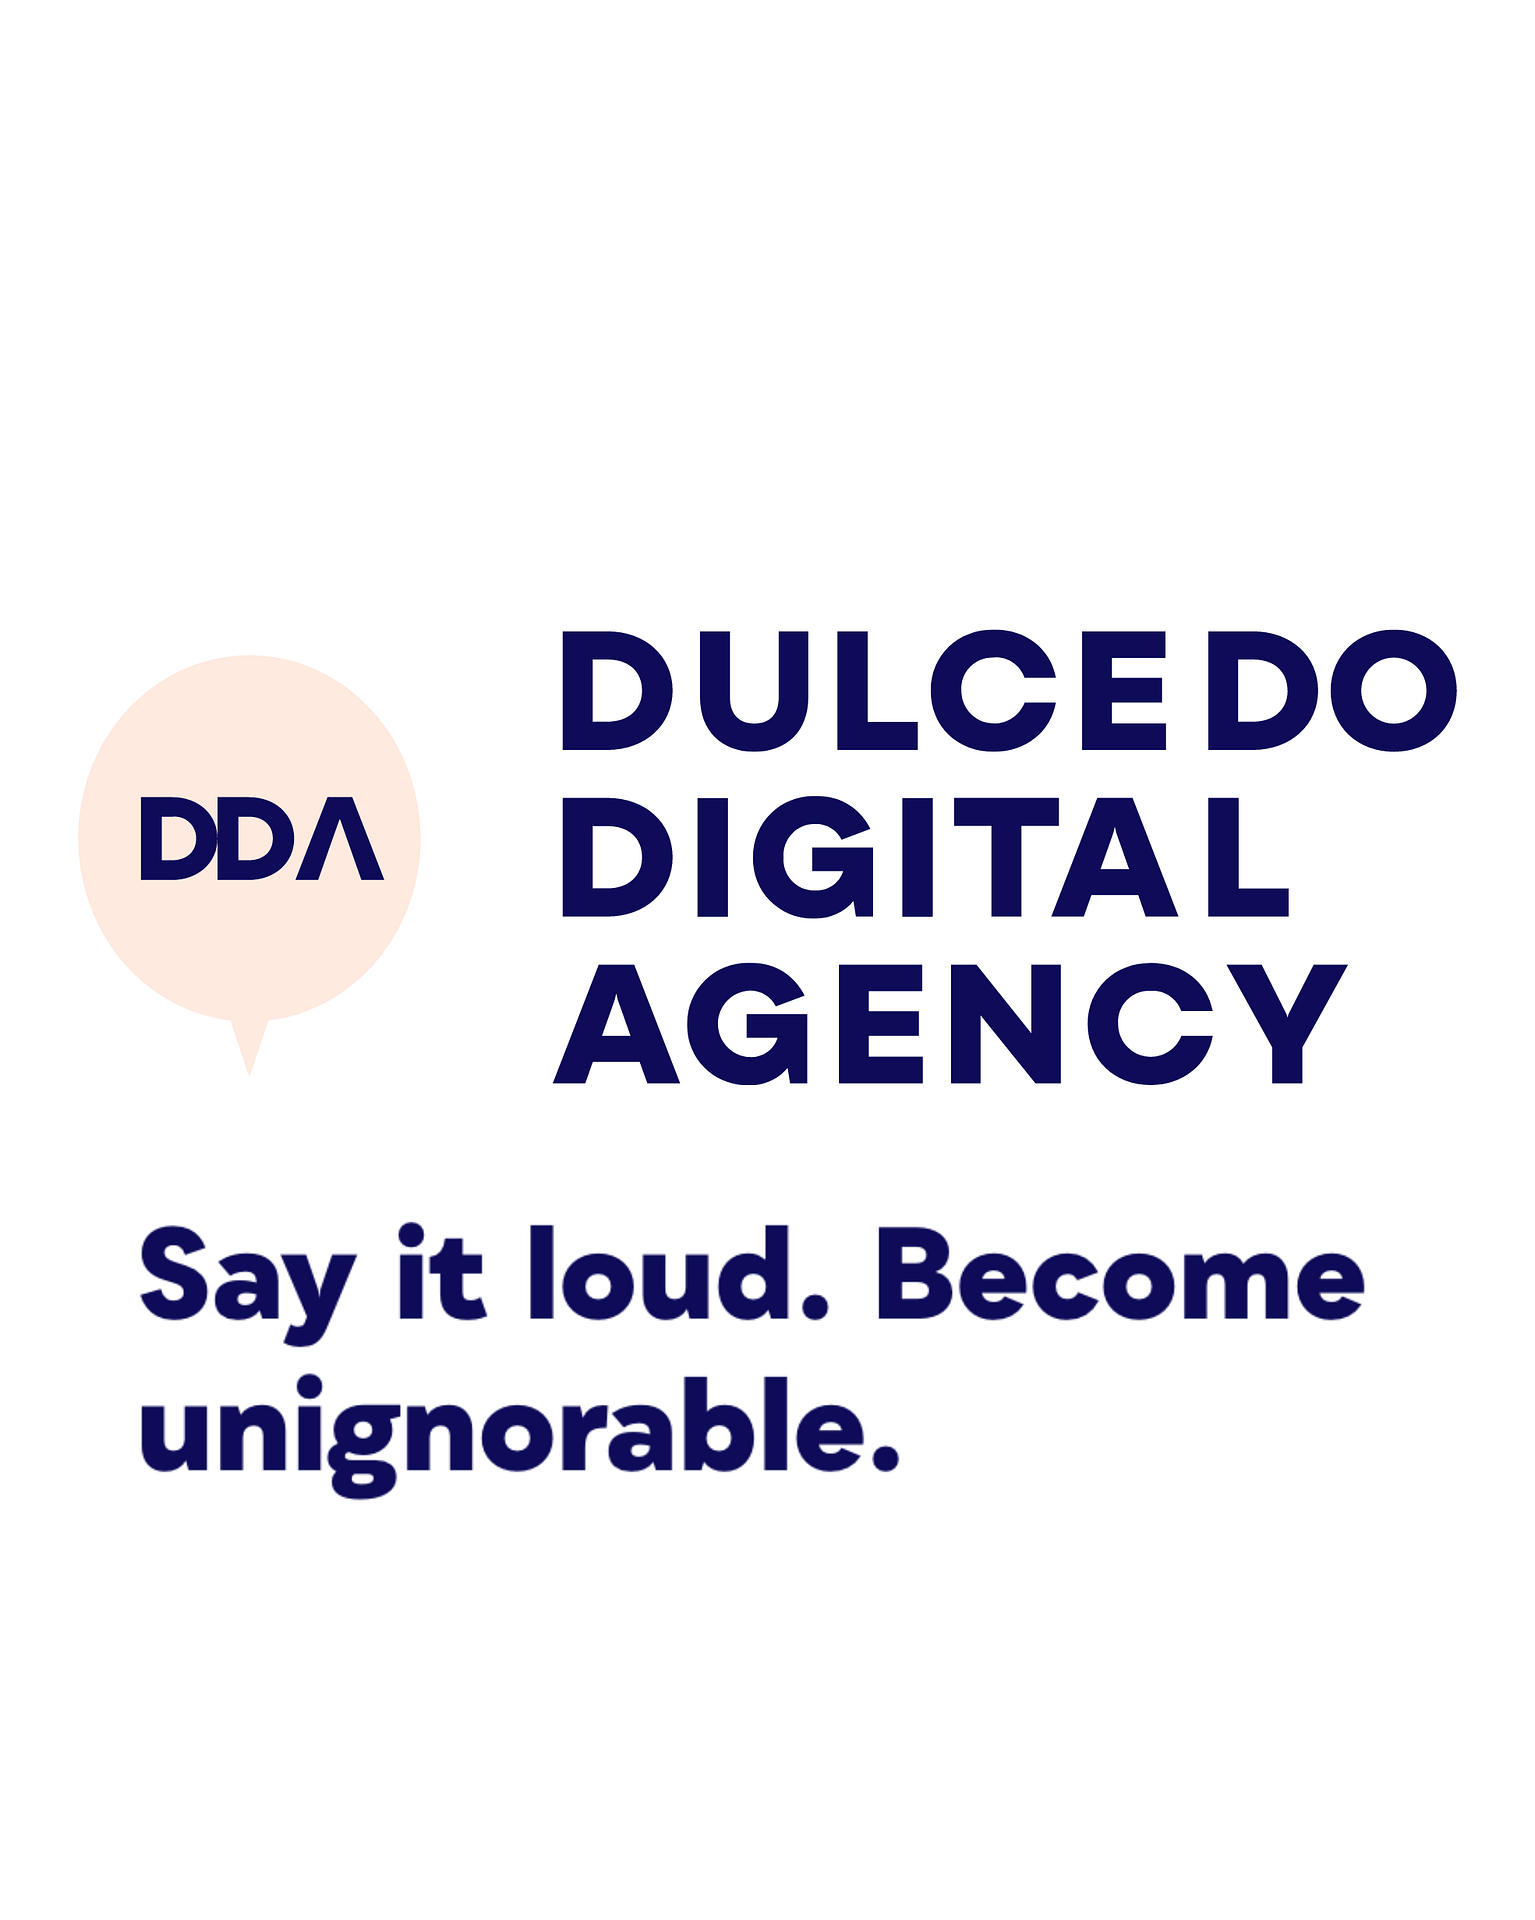 Dulcedo Digital Agency is Officially here!